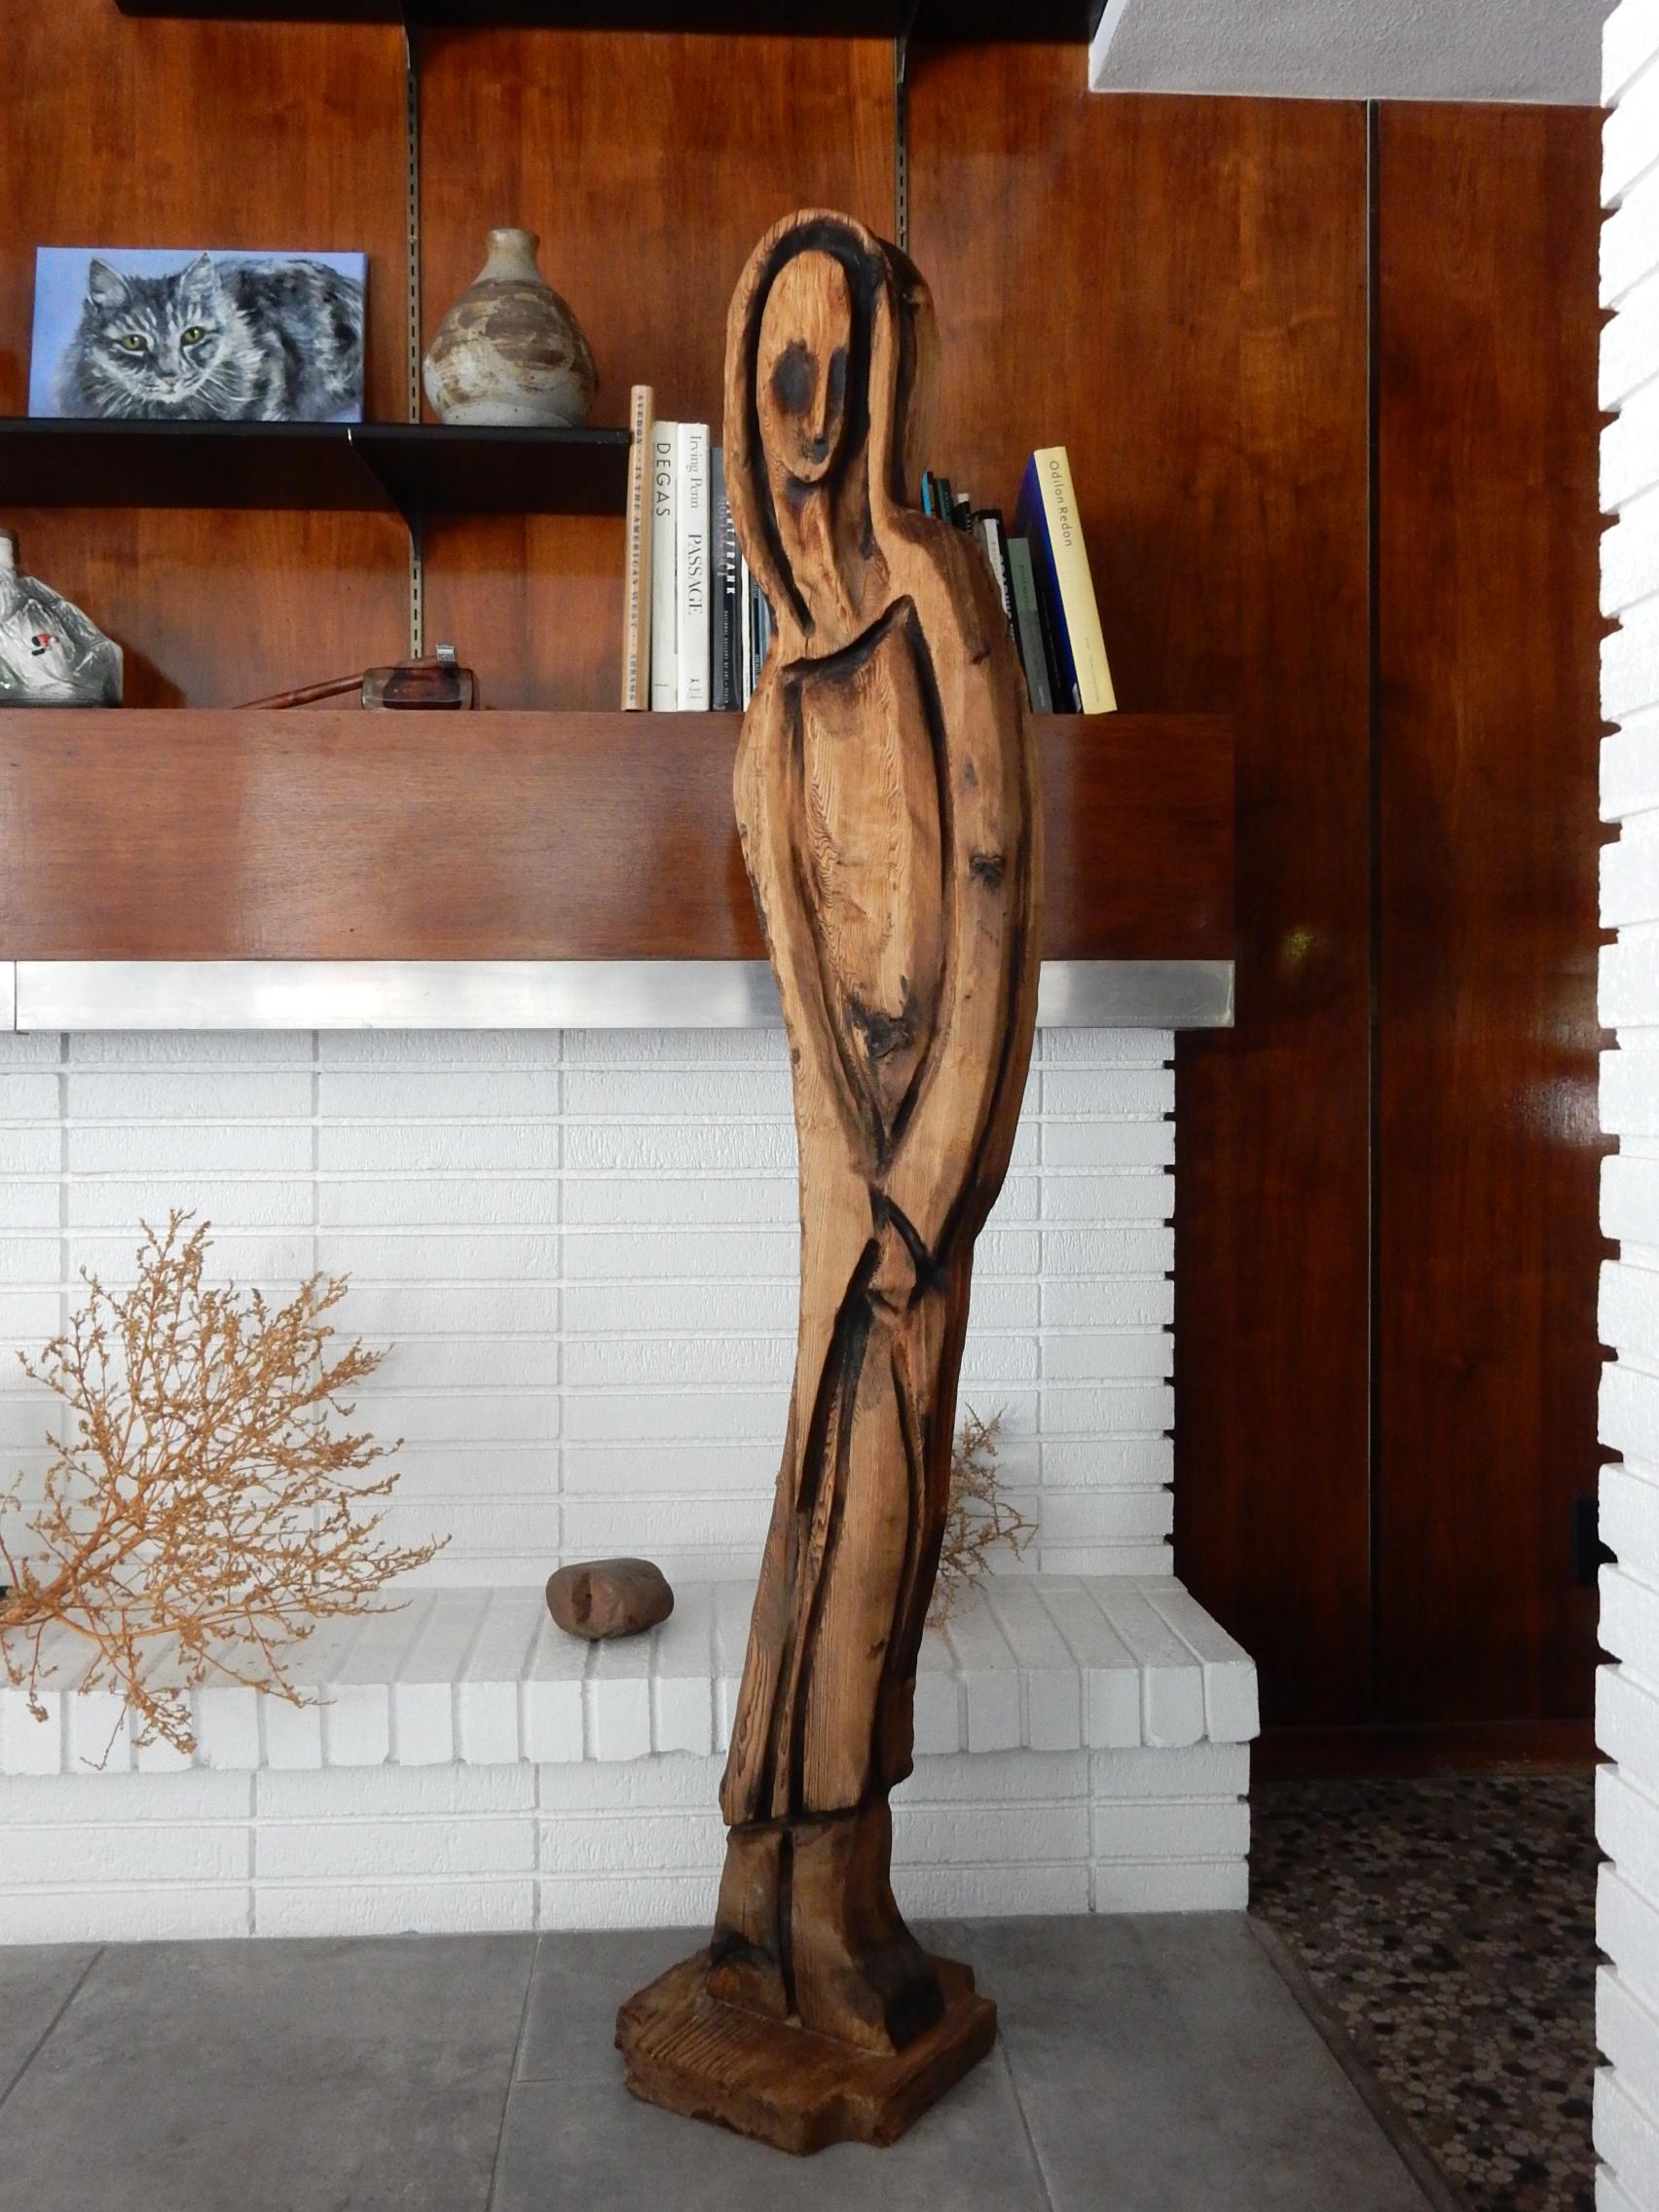 Life-size (over 5 feet tall) expressionist wood floor sculpture, circa 1950s.
Moody figure, reminiscent of 